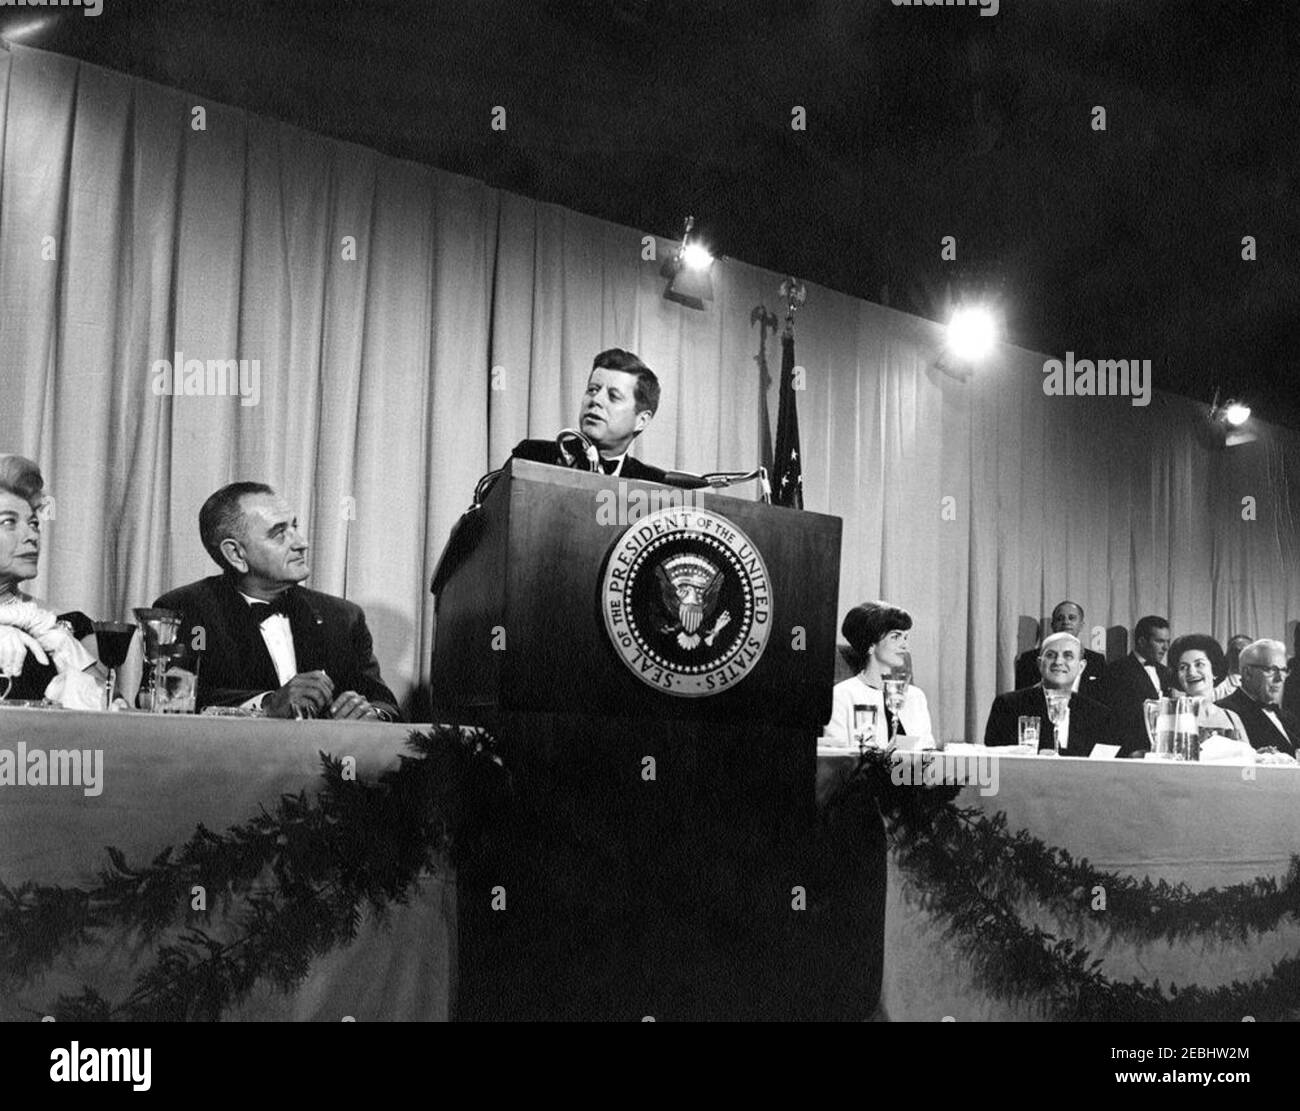 National Cultural Center Fund-raising benefit, 9:23PM. President John F. Kennedy (at lectern) delivers remarks at a fundraising dinner and closed-circuit telecast of u0022An American Pageant of the Artsu0022 for the National Cultural Center. Seated (L-R): chairman of the dinner committee for the National Cultural Center, Suzanne Gardner; Vice President Lyndon B. Johnson; First Lady Jacqueline Kennedy; Chairman of the Board of Trustees for the National Cultural Center, Roger L. Stevens; Lady Bird Johnson; and Chief Justice of the Supreme Court, Earl Warren. National Guard Armory, Washington, Stock Photo